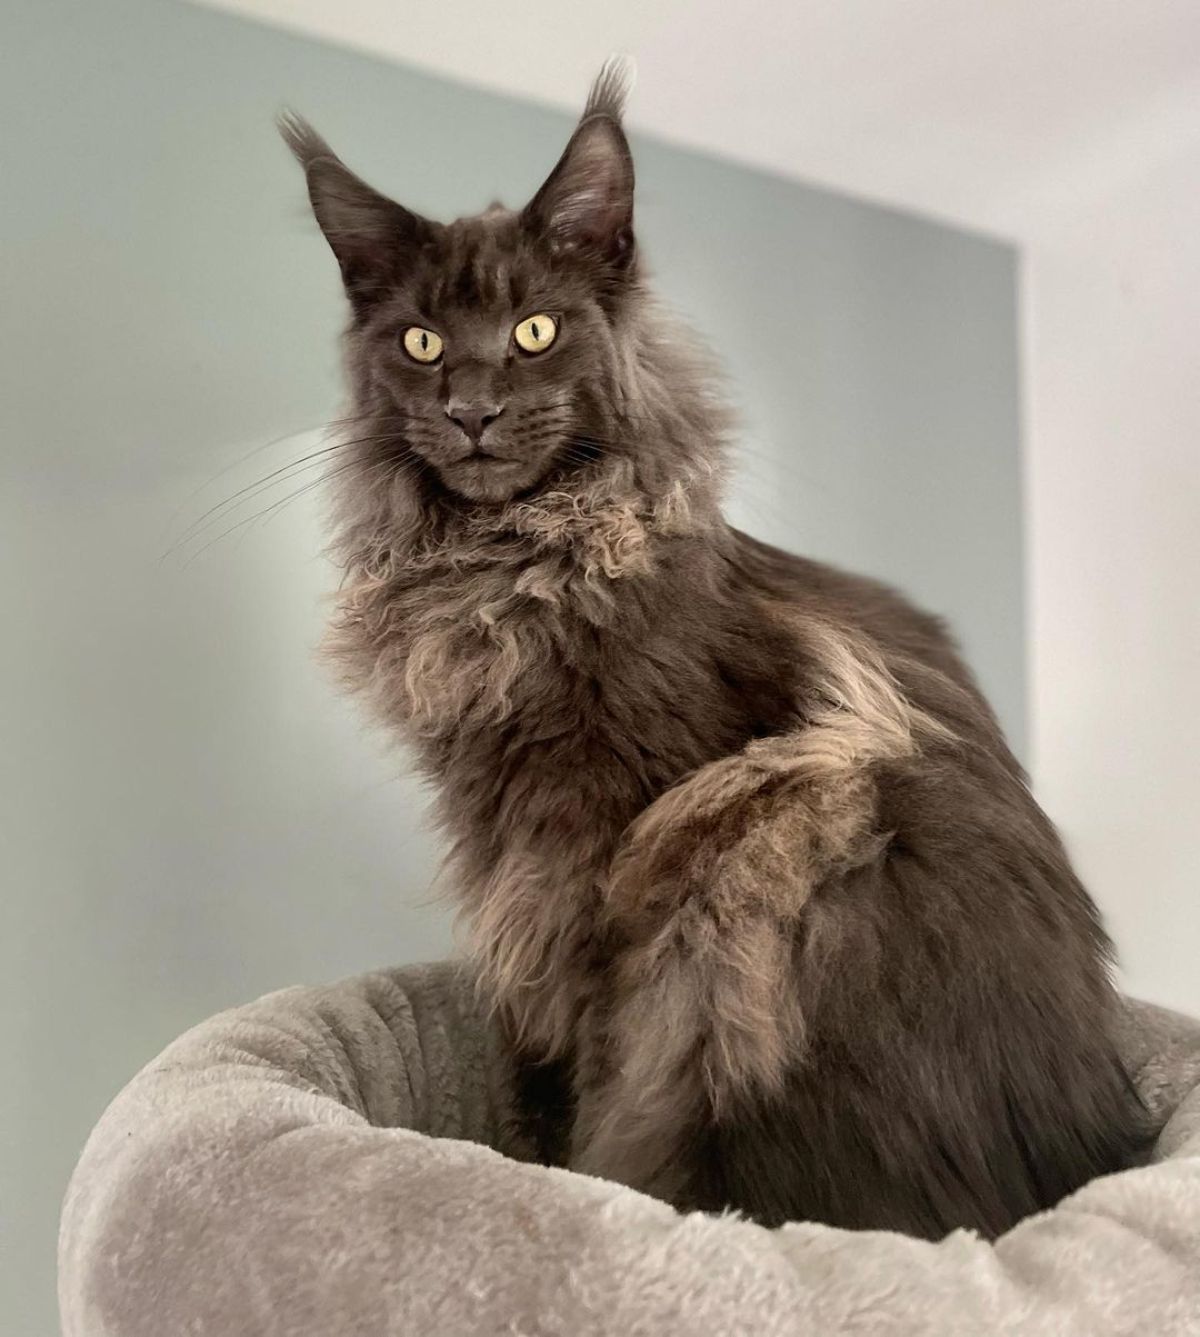 A fluffy gray maine coon with yellow eyes sitting in a cat bed.